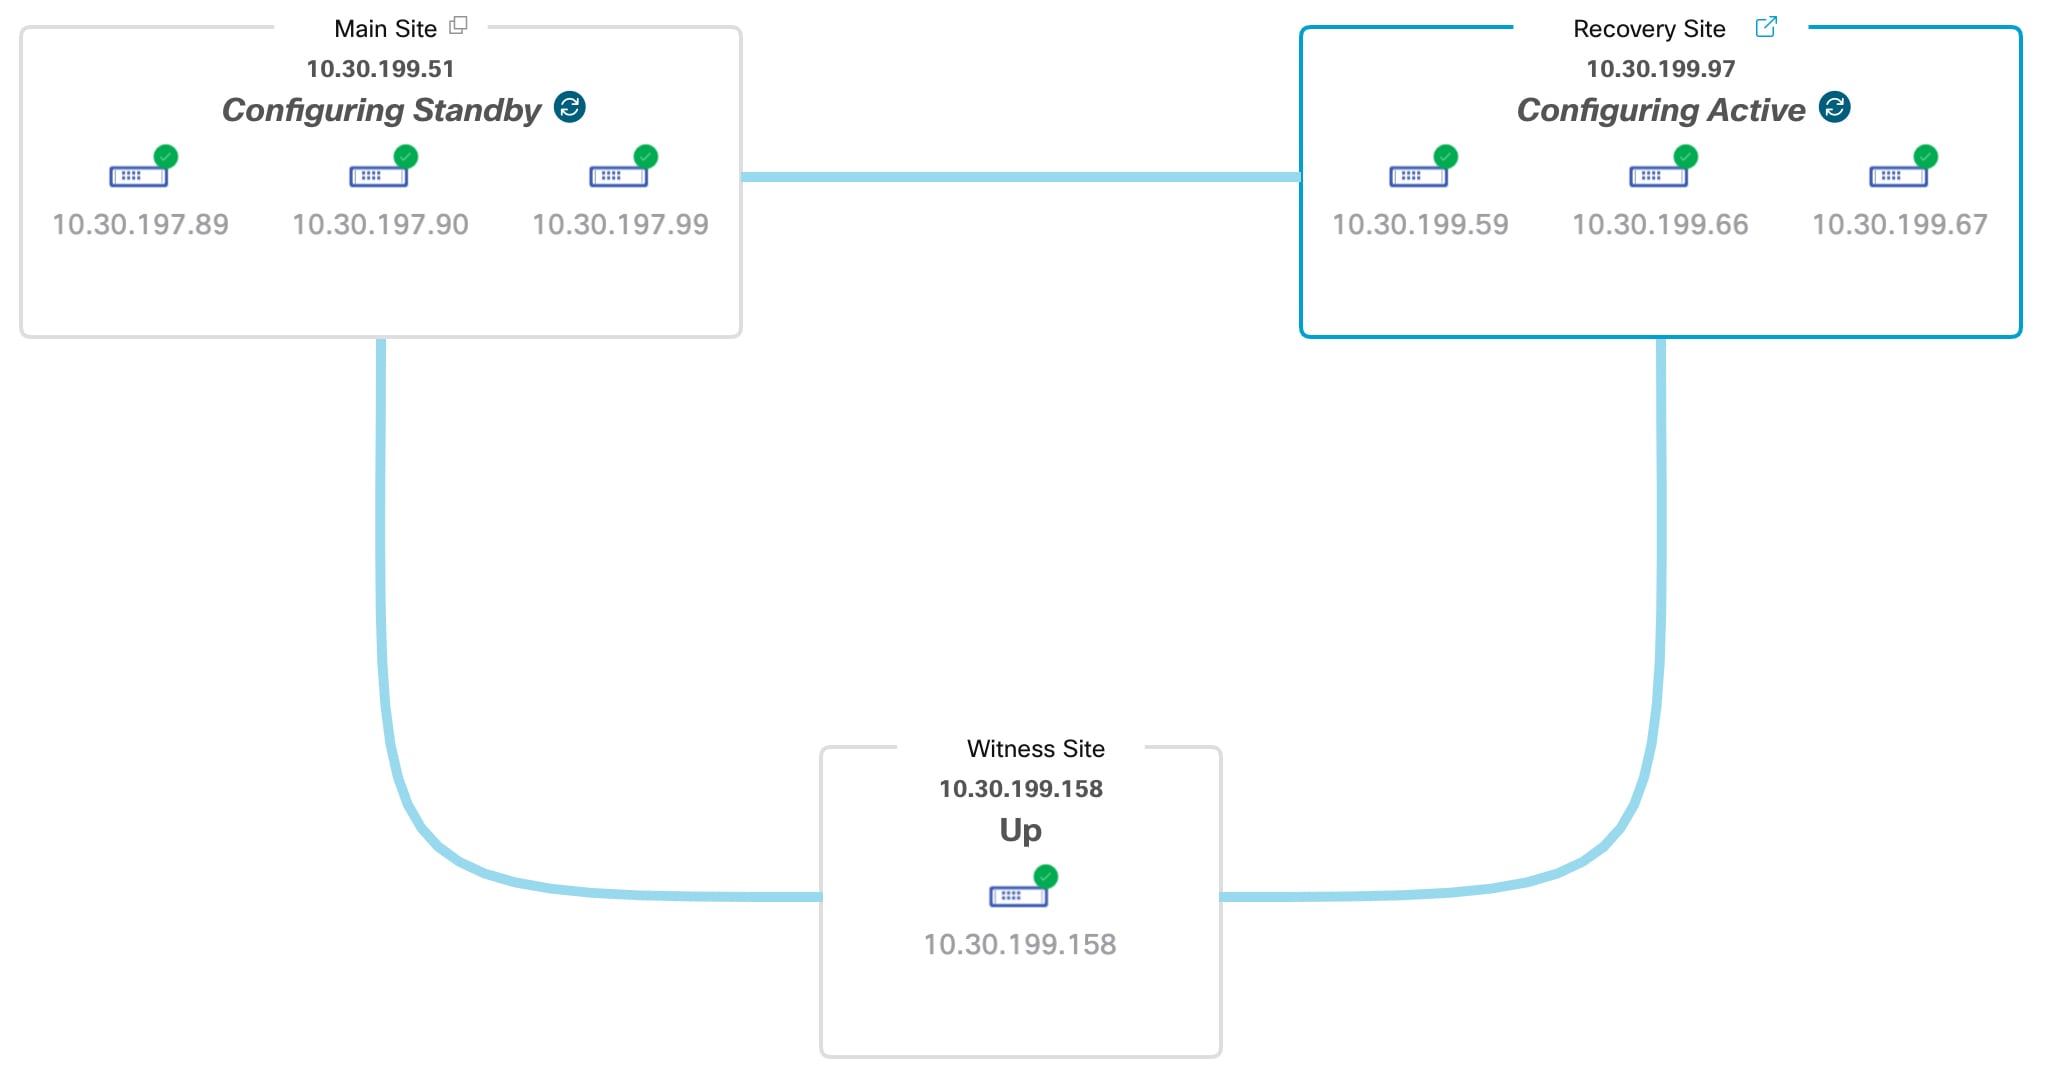 The Monitoring tab of the Cisco DNA Center Disaster Recovery window displays the system topology. The main and recovery sites are in Configuring state.